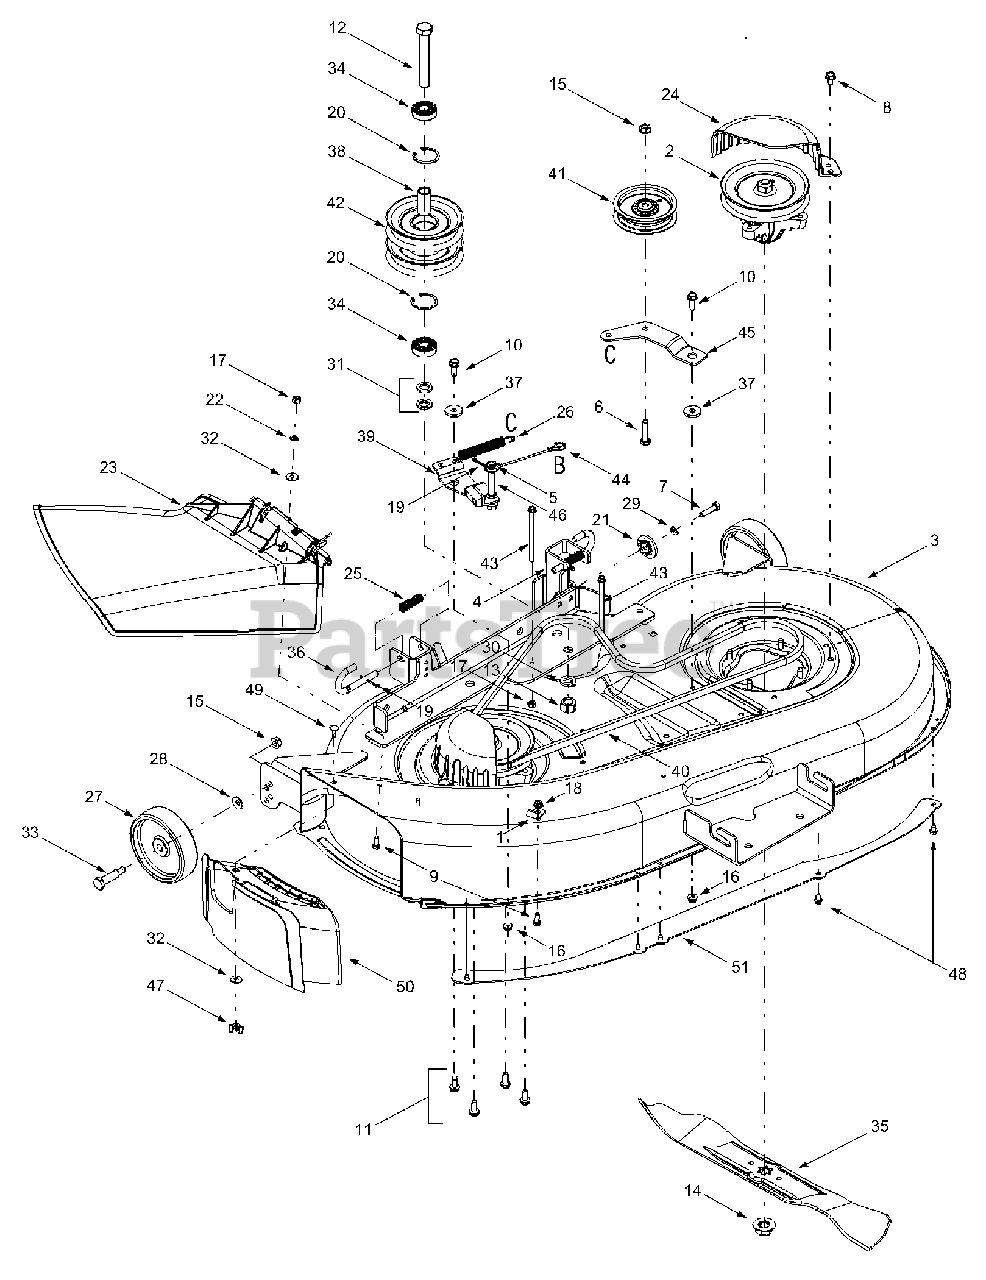 Yardman Lawn Mower Parts Diagram Your Complete Guide To Identifying And Replacing Parts Lawn